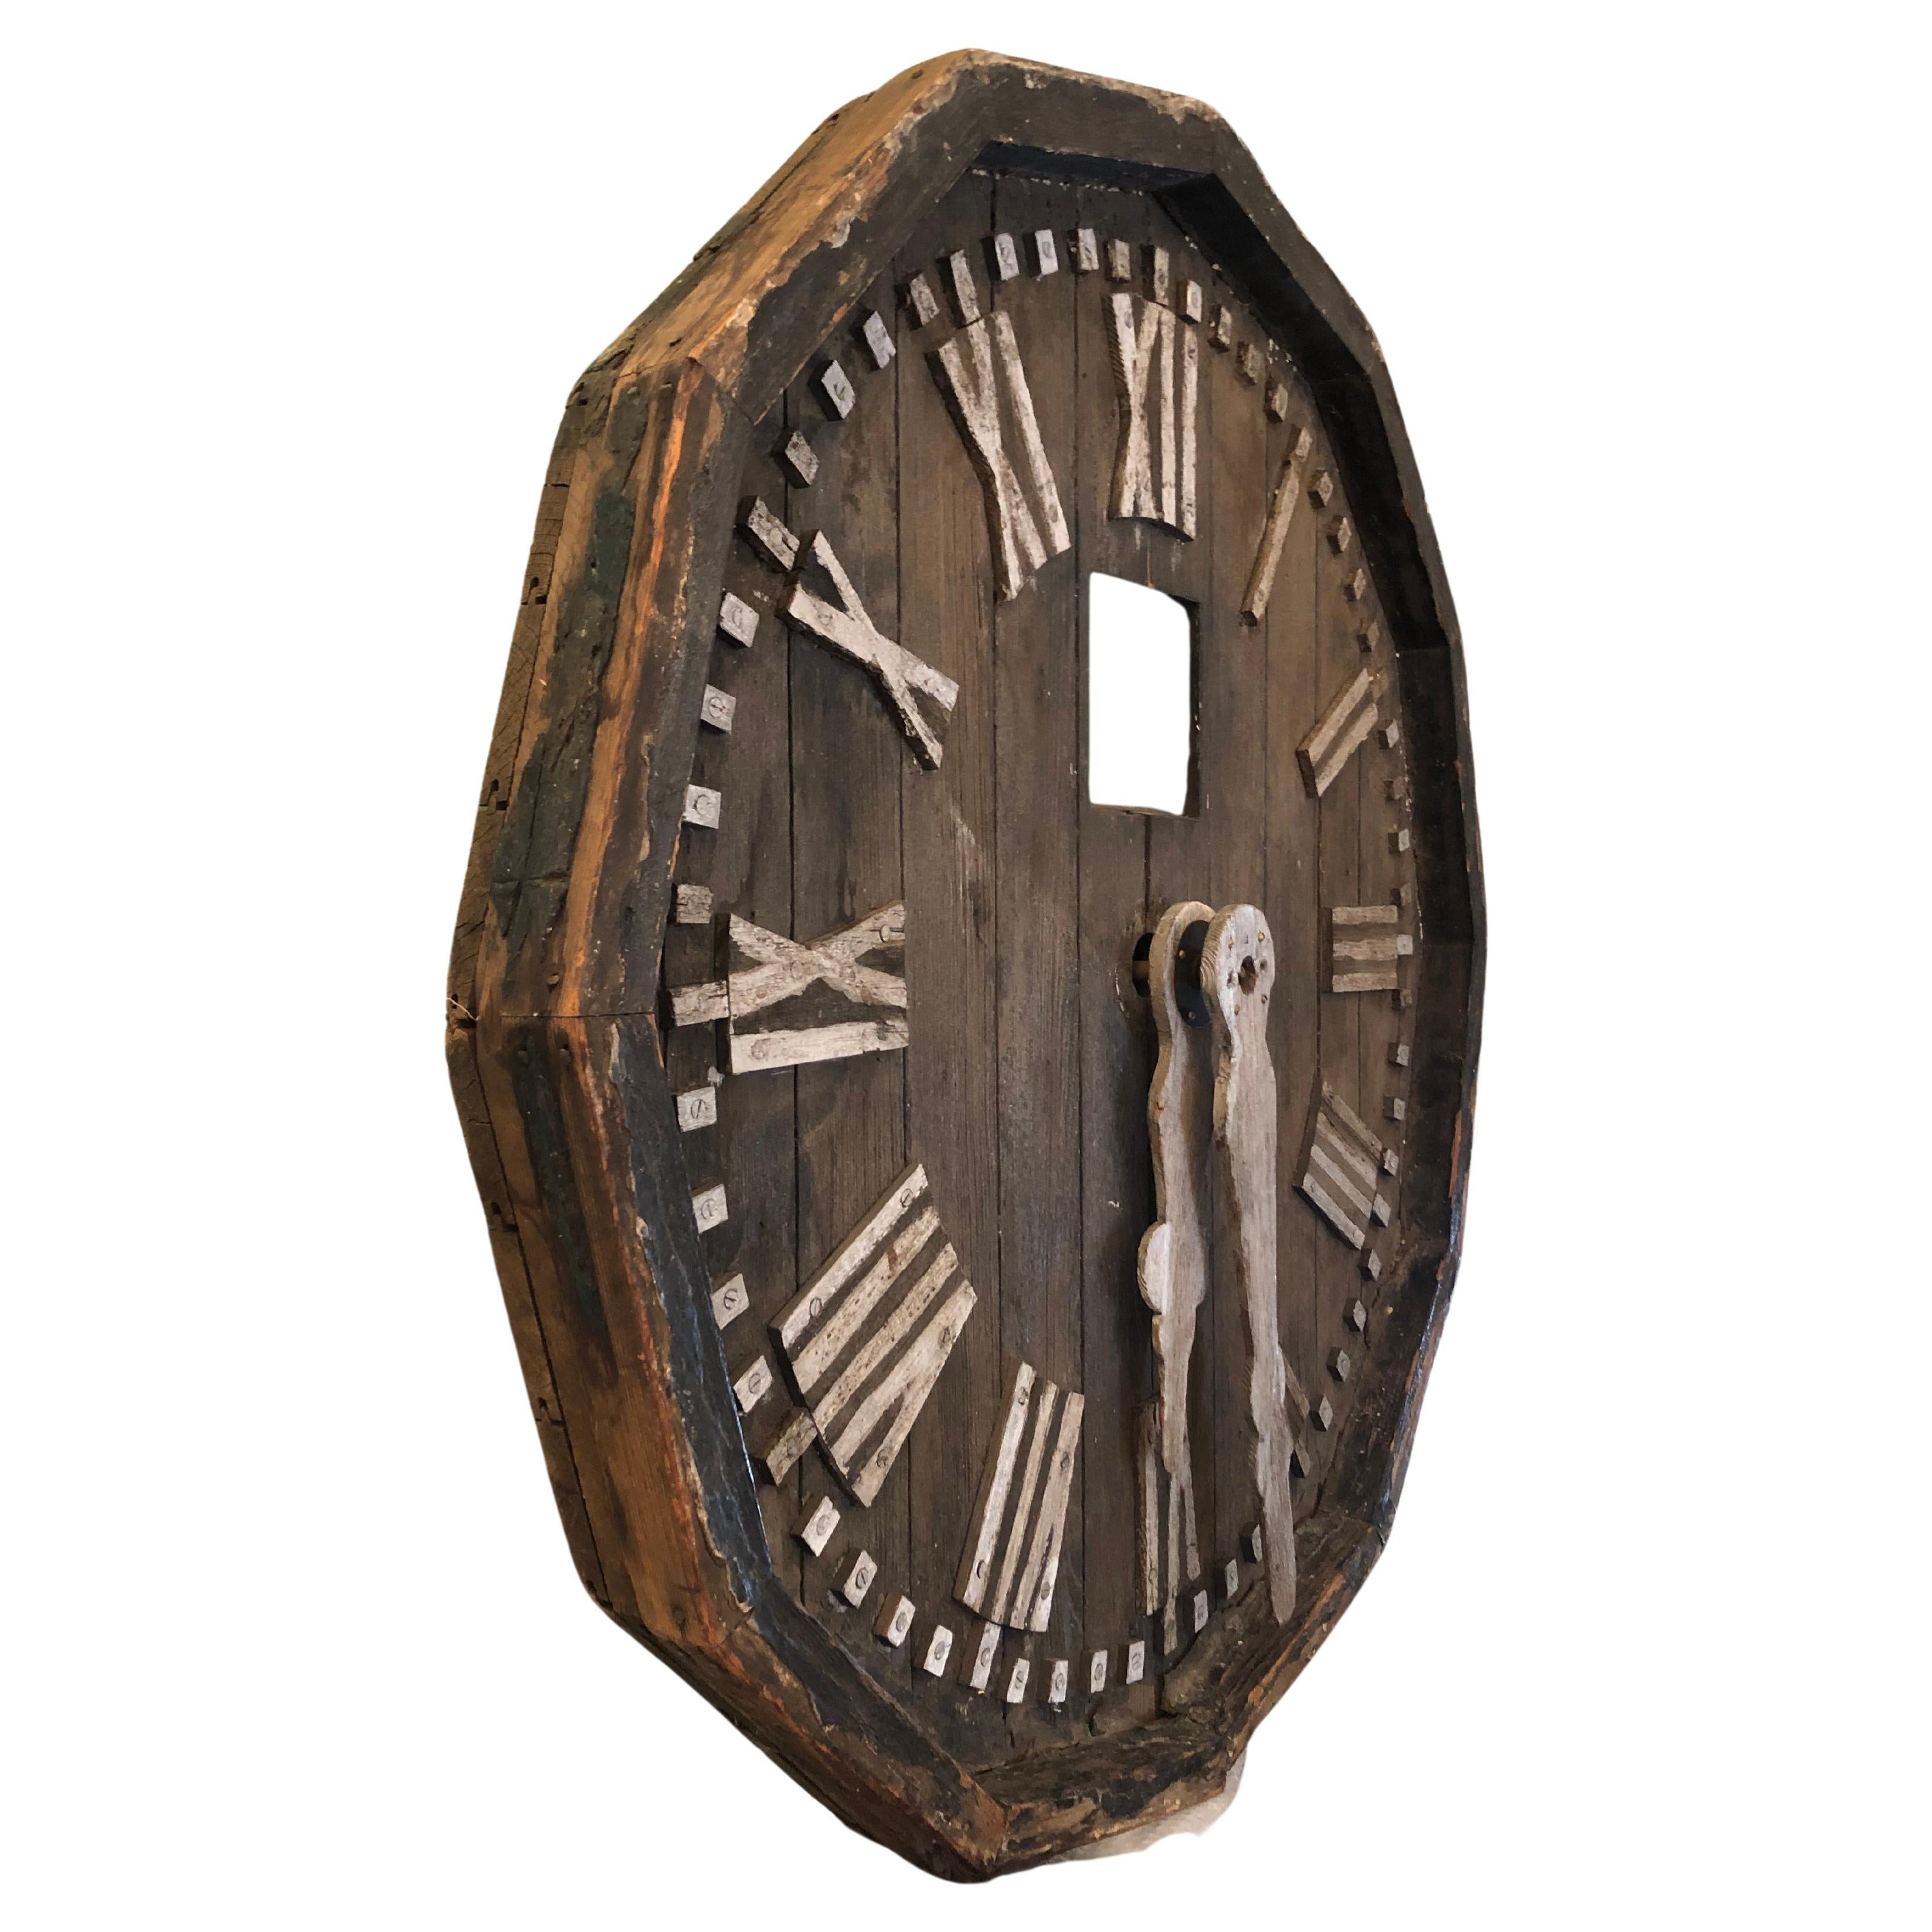 Rustic Huge Antique Distressed Reclaimed Wood Architectural Fragment Clock Face For Sale